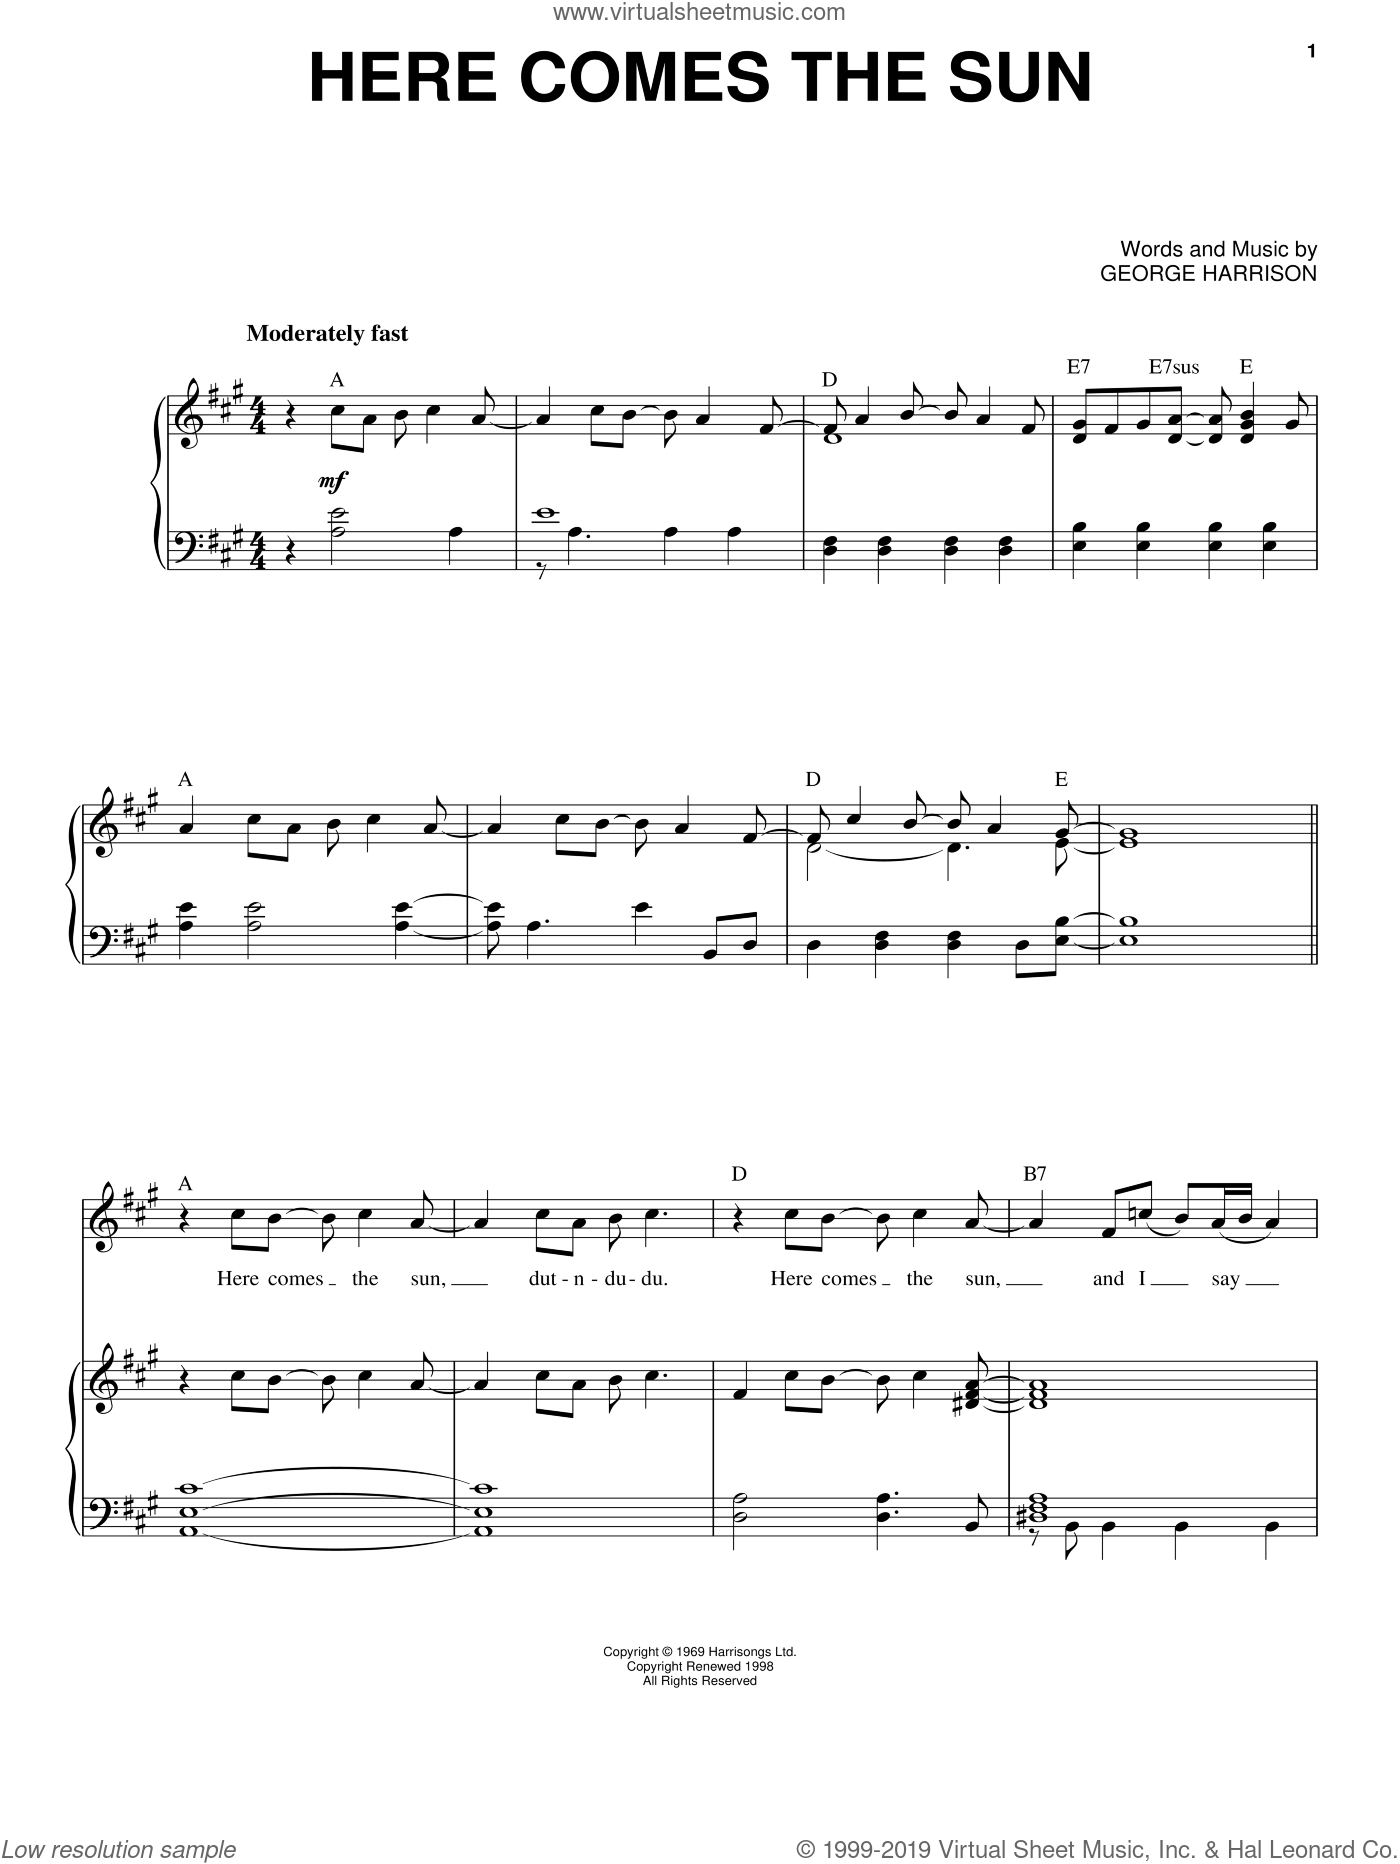 Beatles - Here Comes The Sun sheet music for voice and piano